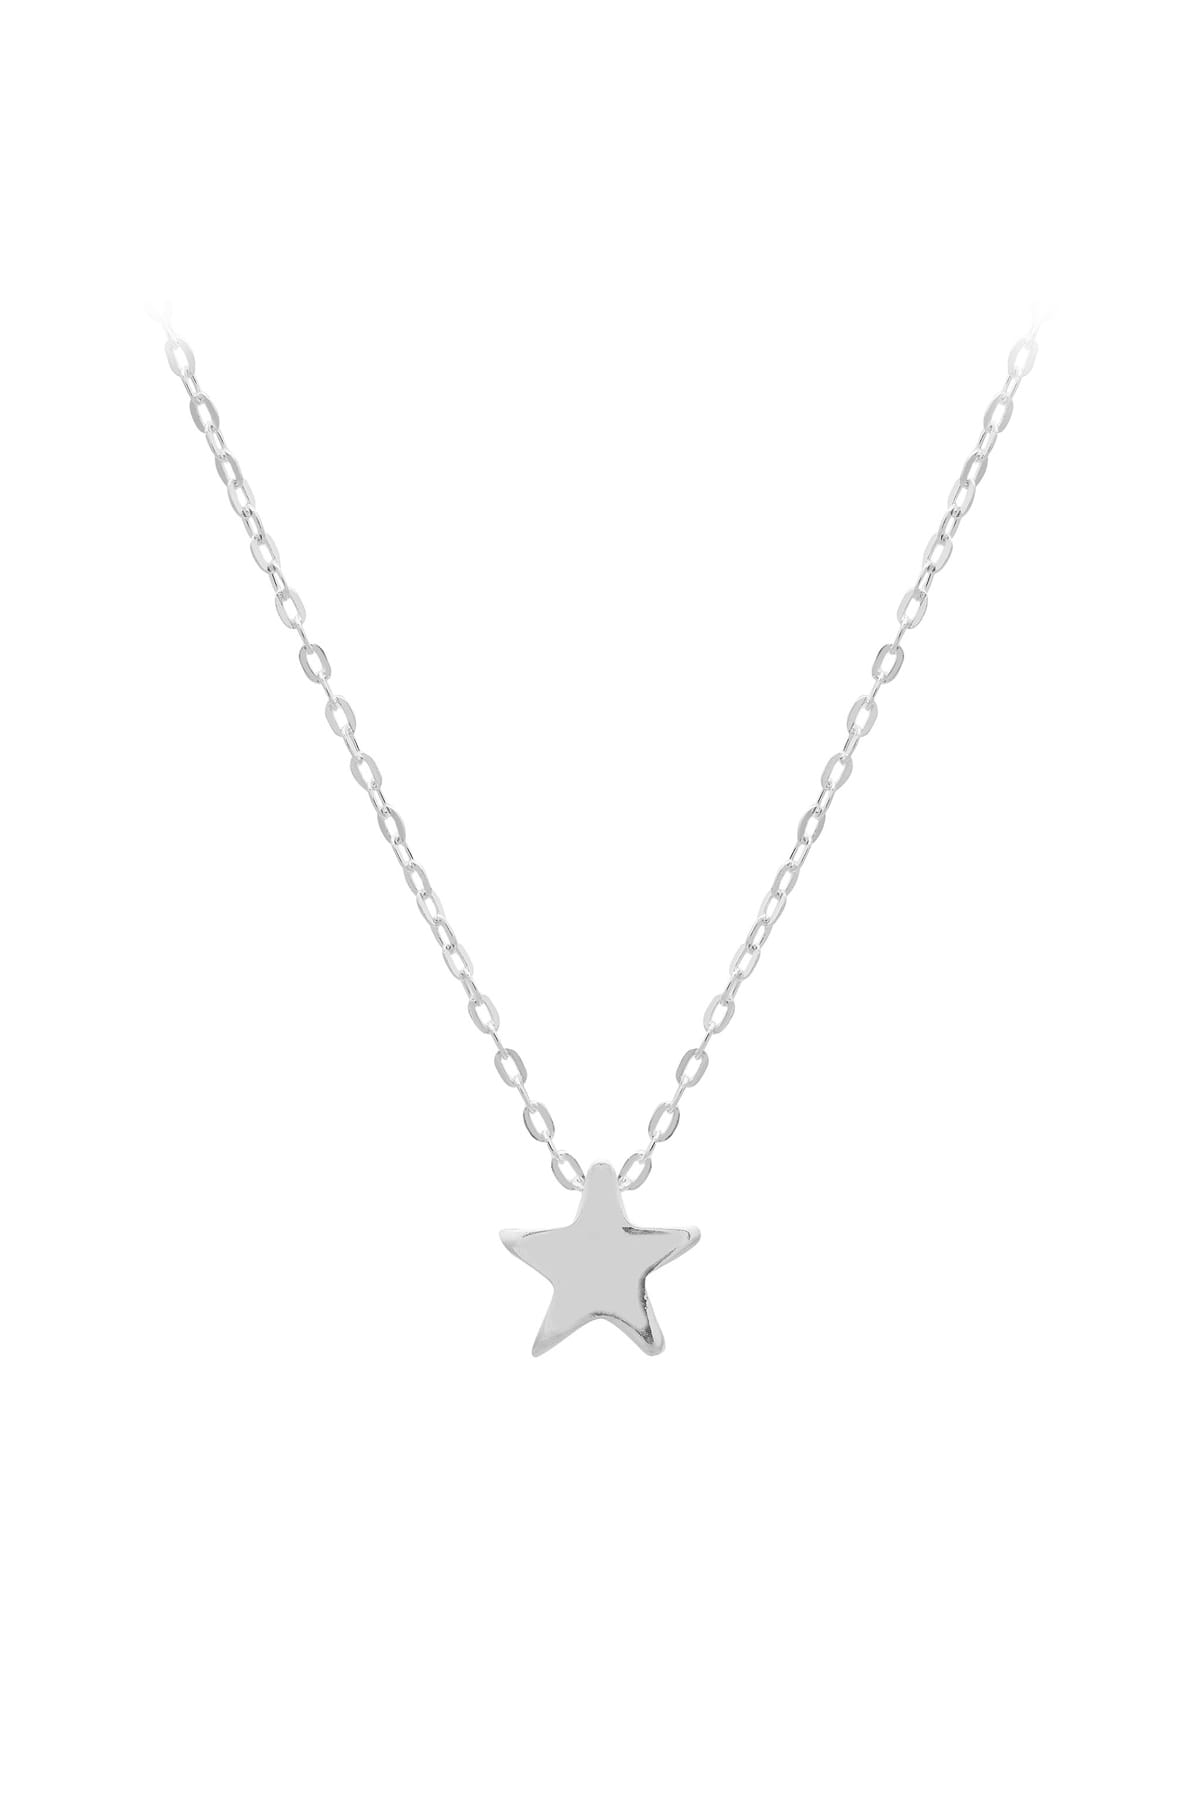 Sterling Silver Star Pendant with 40cm Chain Plus 5cm Extender available at LeGassick Diamonds and Jewellery Gold Coast, Australia.